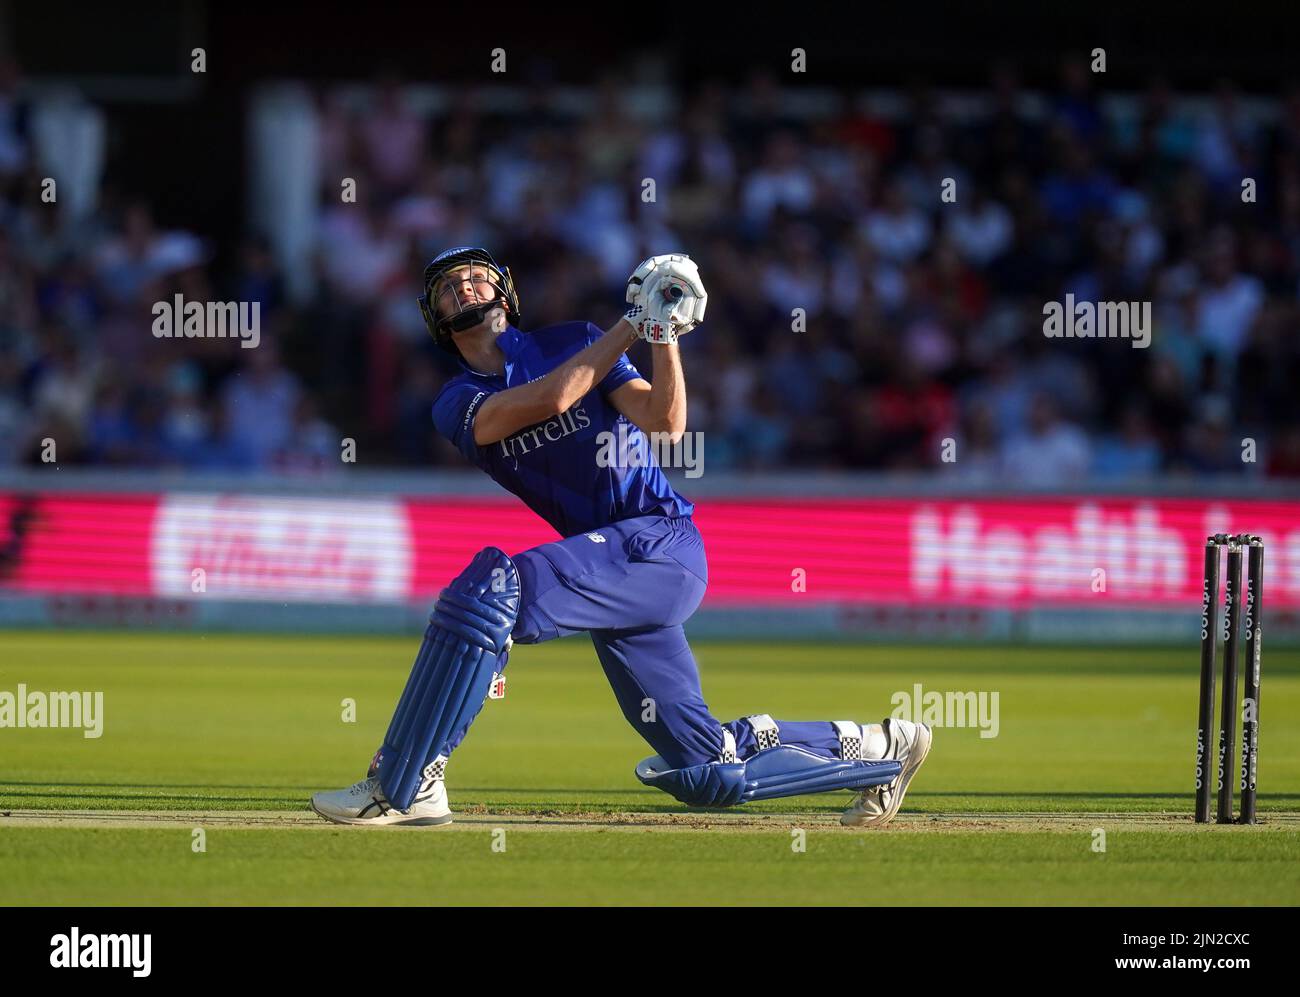 London Spirit's Glenn Maxwell hits a six during The Hundred match at Lord's, London. Picture date: Monday August 8, 2022. Stock Photo